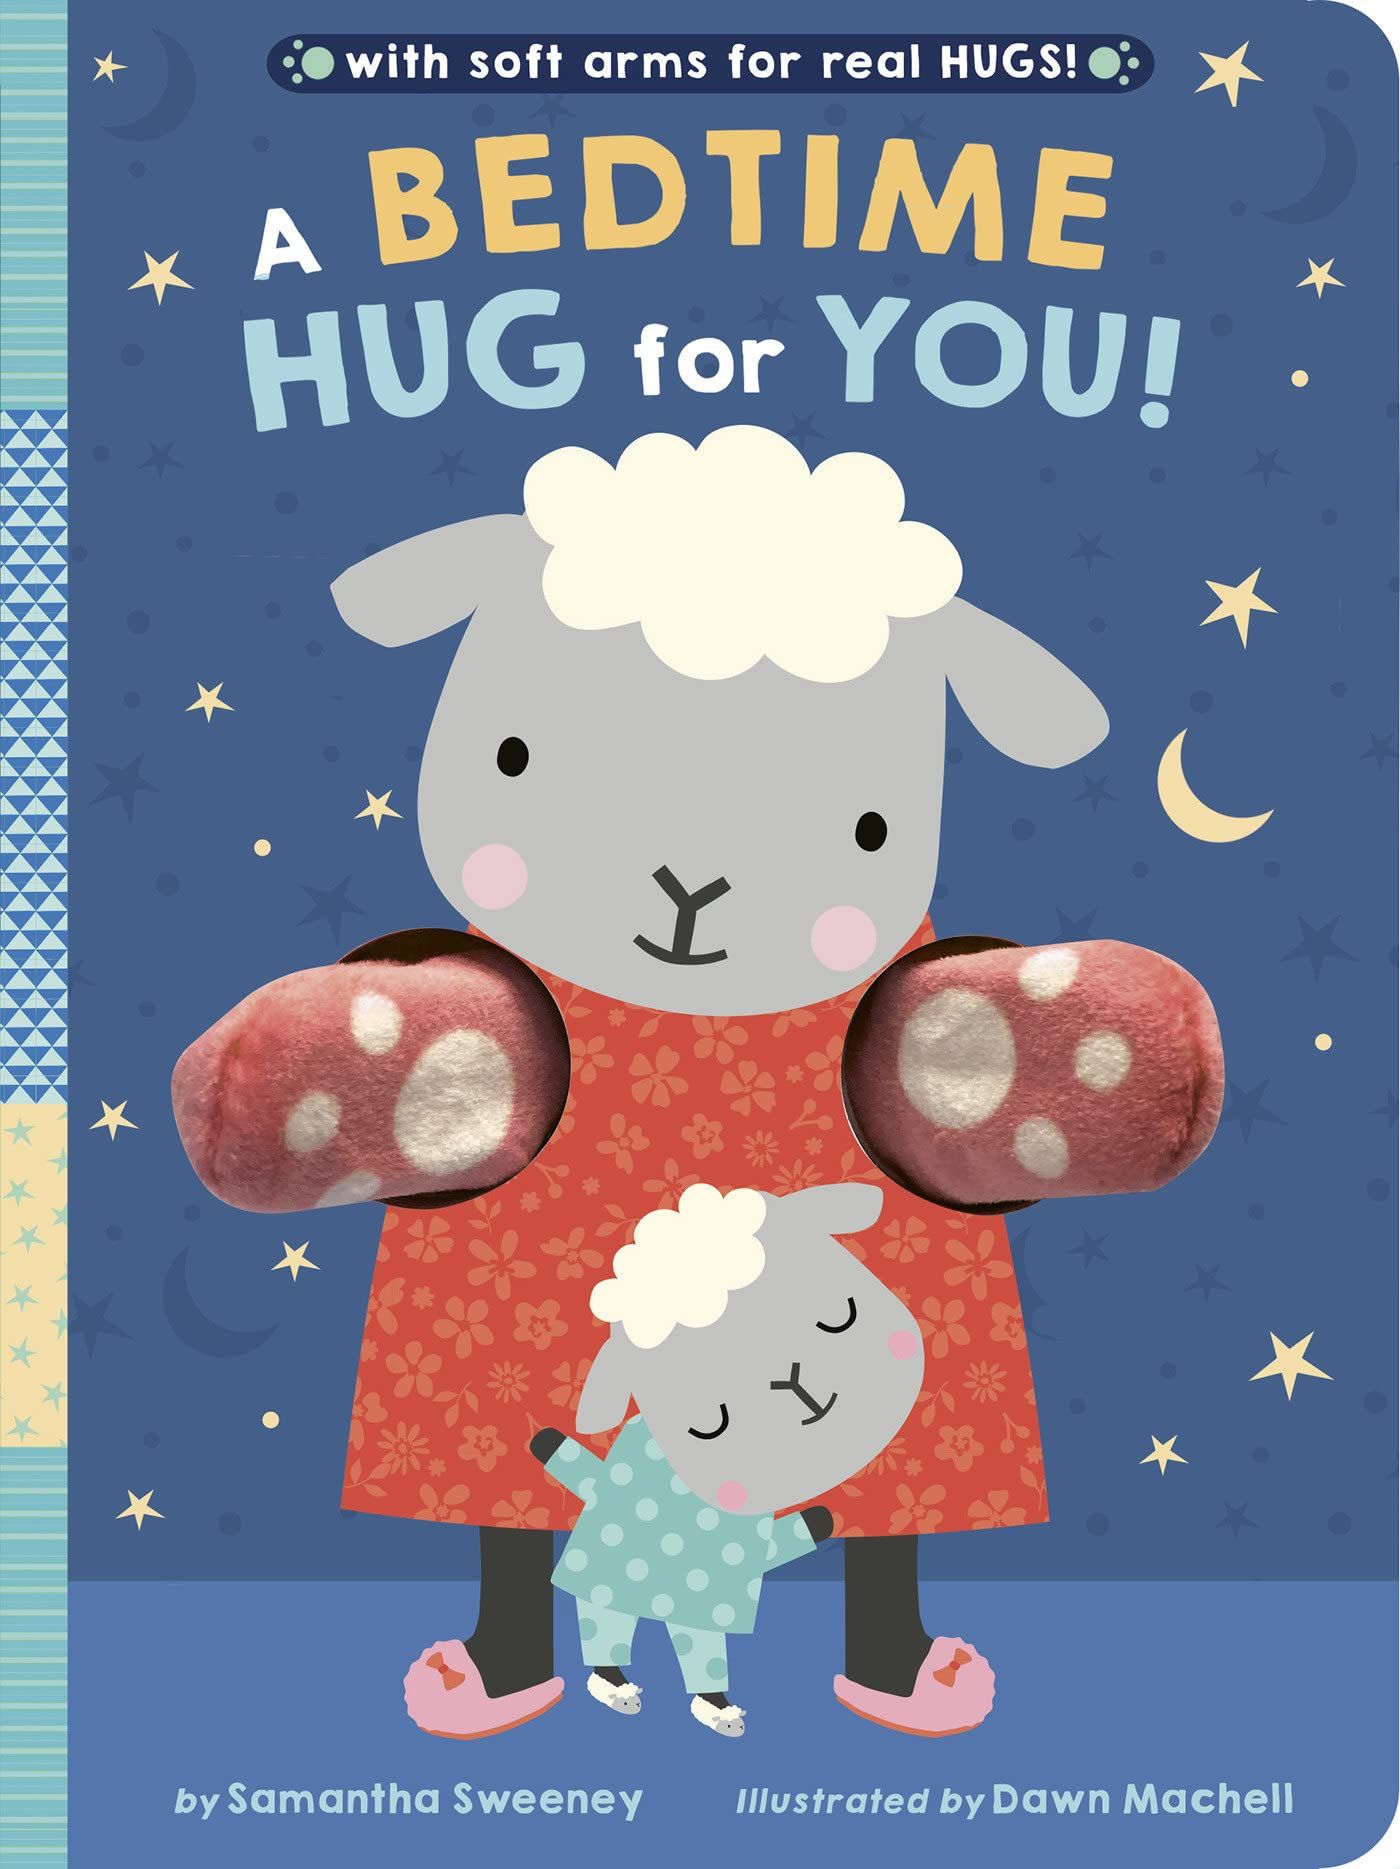 <p><strong>$8.50</strong></p><p>With soft arms toddlers can cuddle while you read, the structure of this bedtime board book is as comforting as the story it tells. </p>